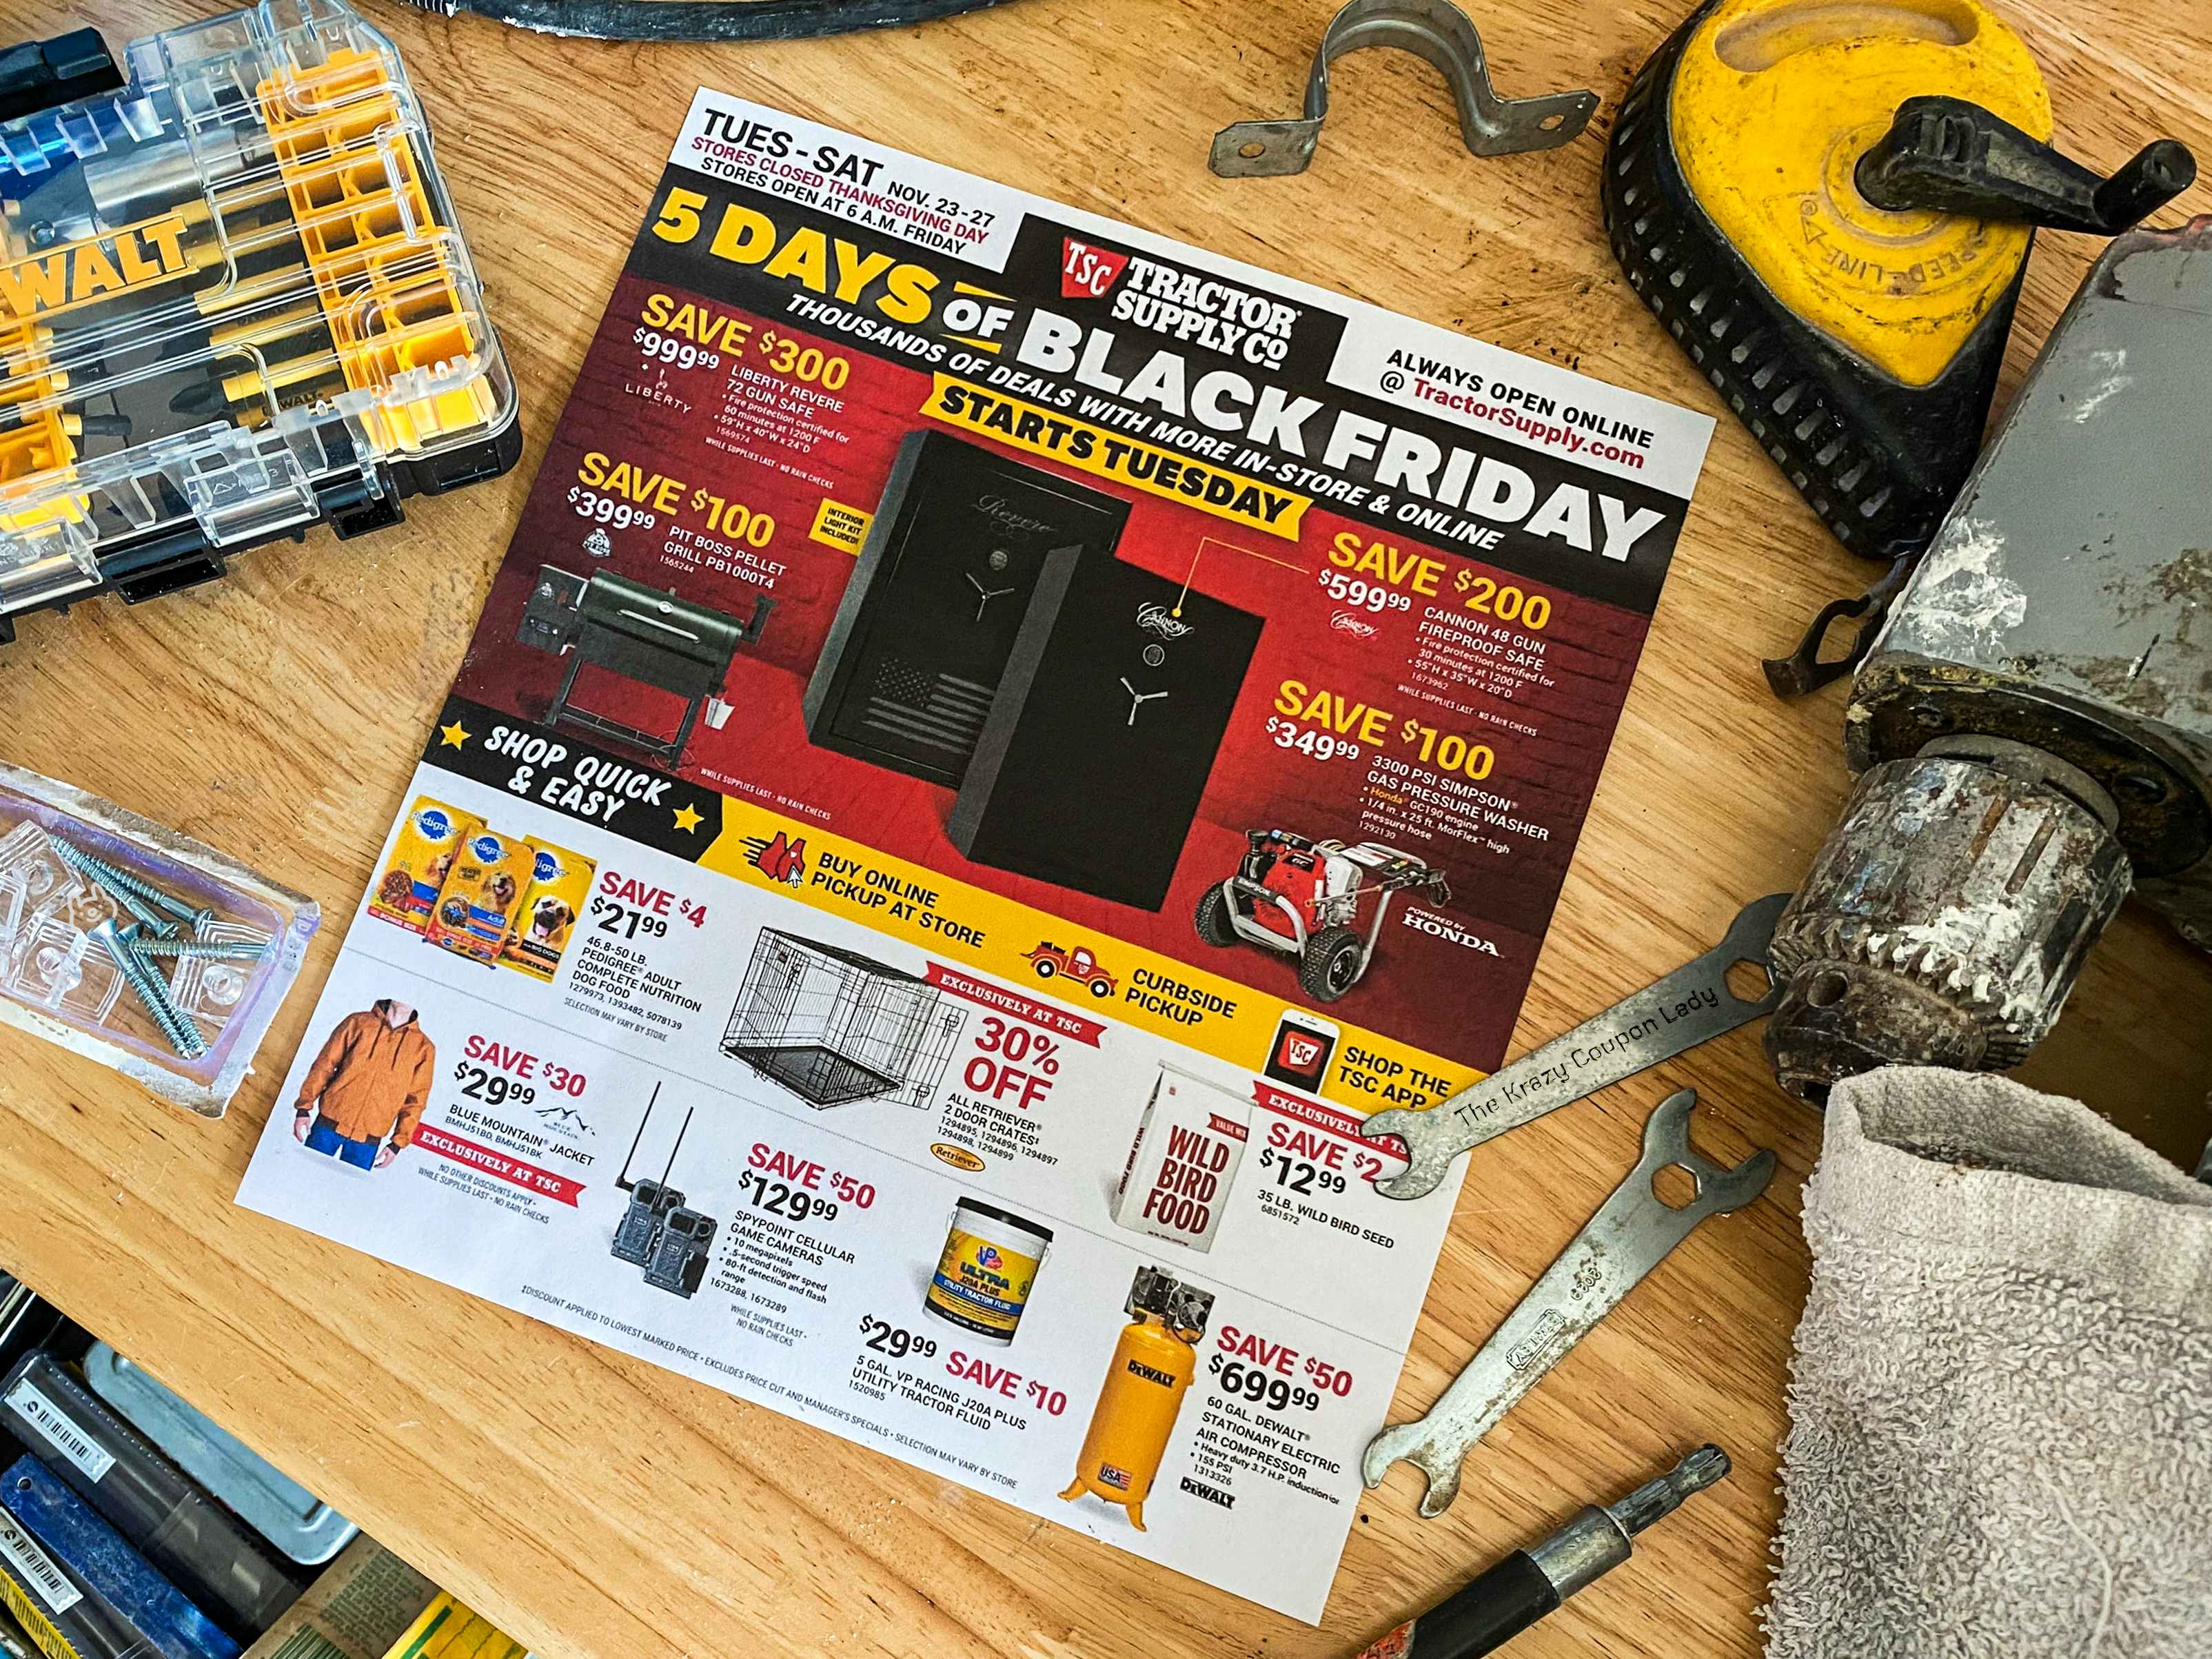 A Tractor Supply Co 2021 Black Friday ad sitting on a work bench surrounded by tools.